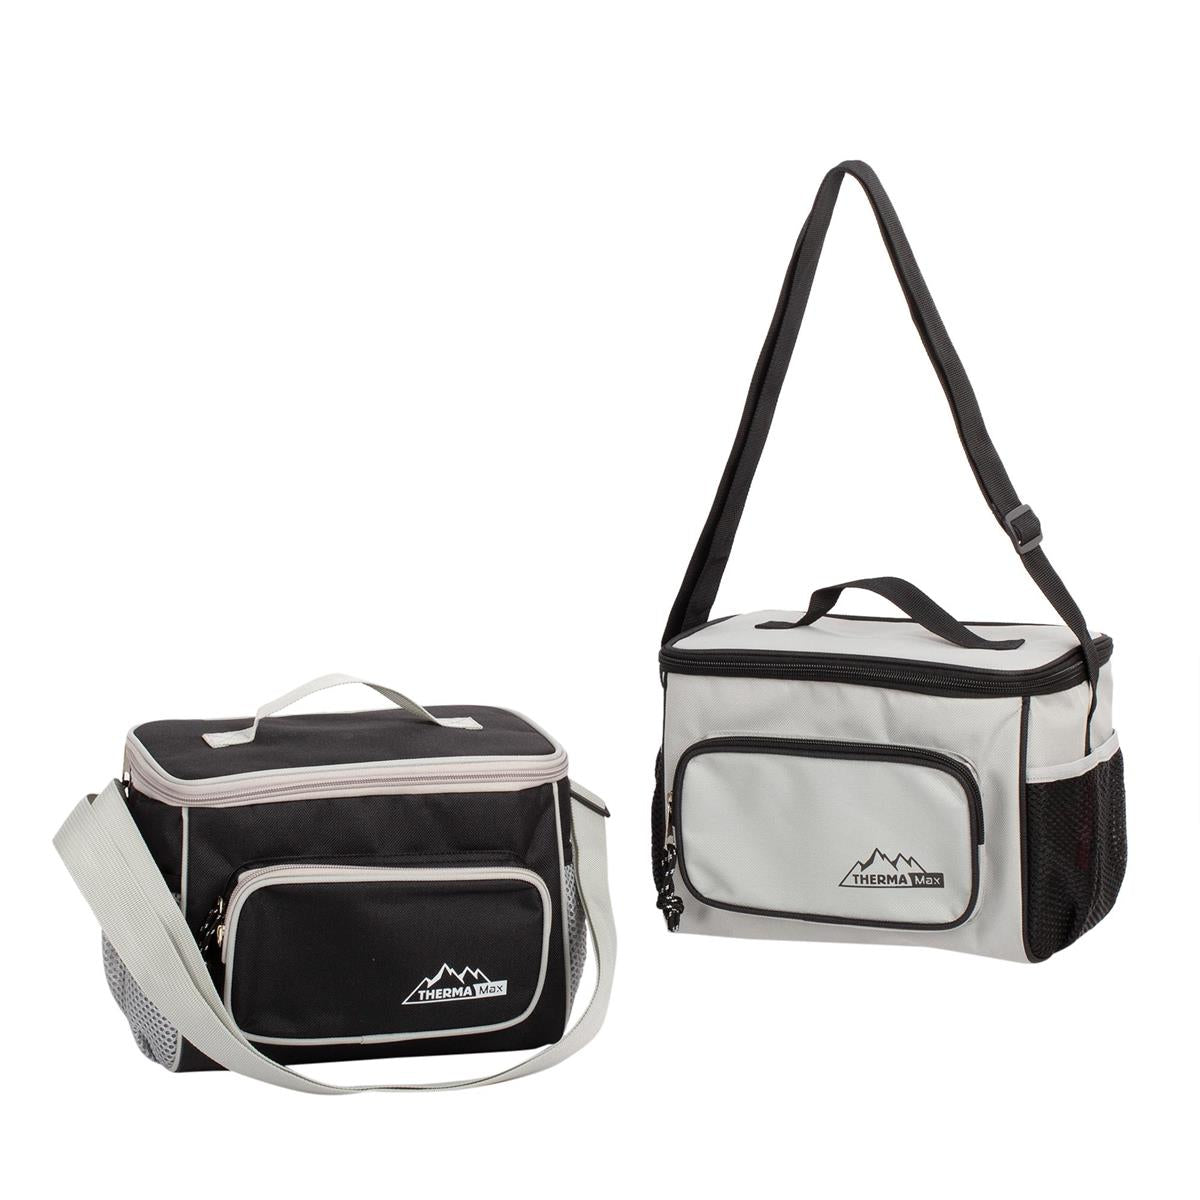 Therma Max Insulated Lunch Cooler Bag, 9.4"x6.3"x7.1"